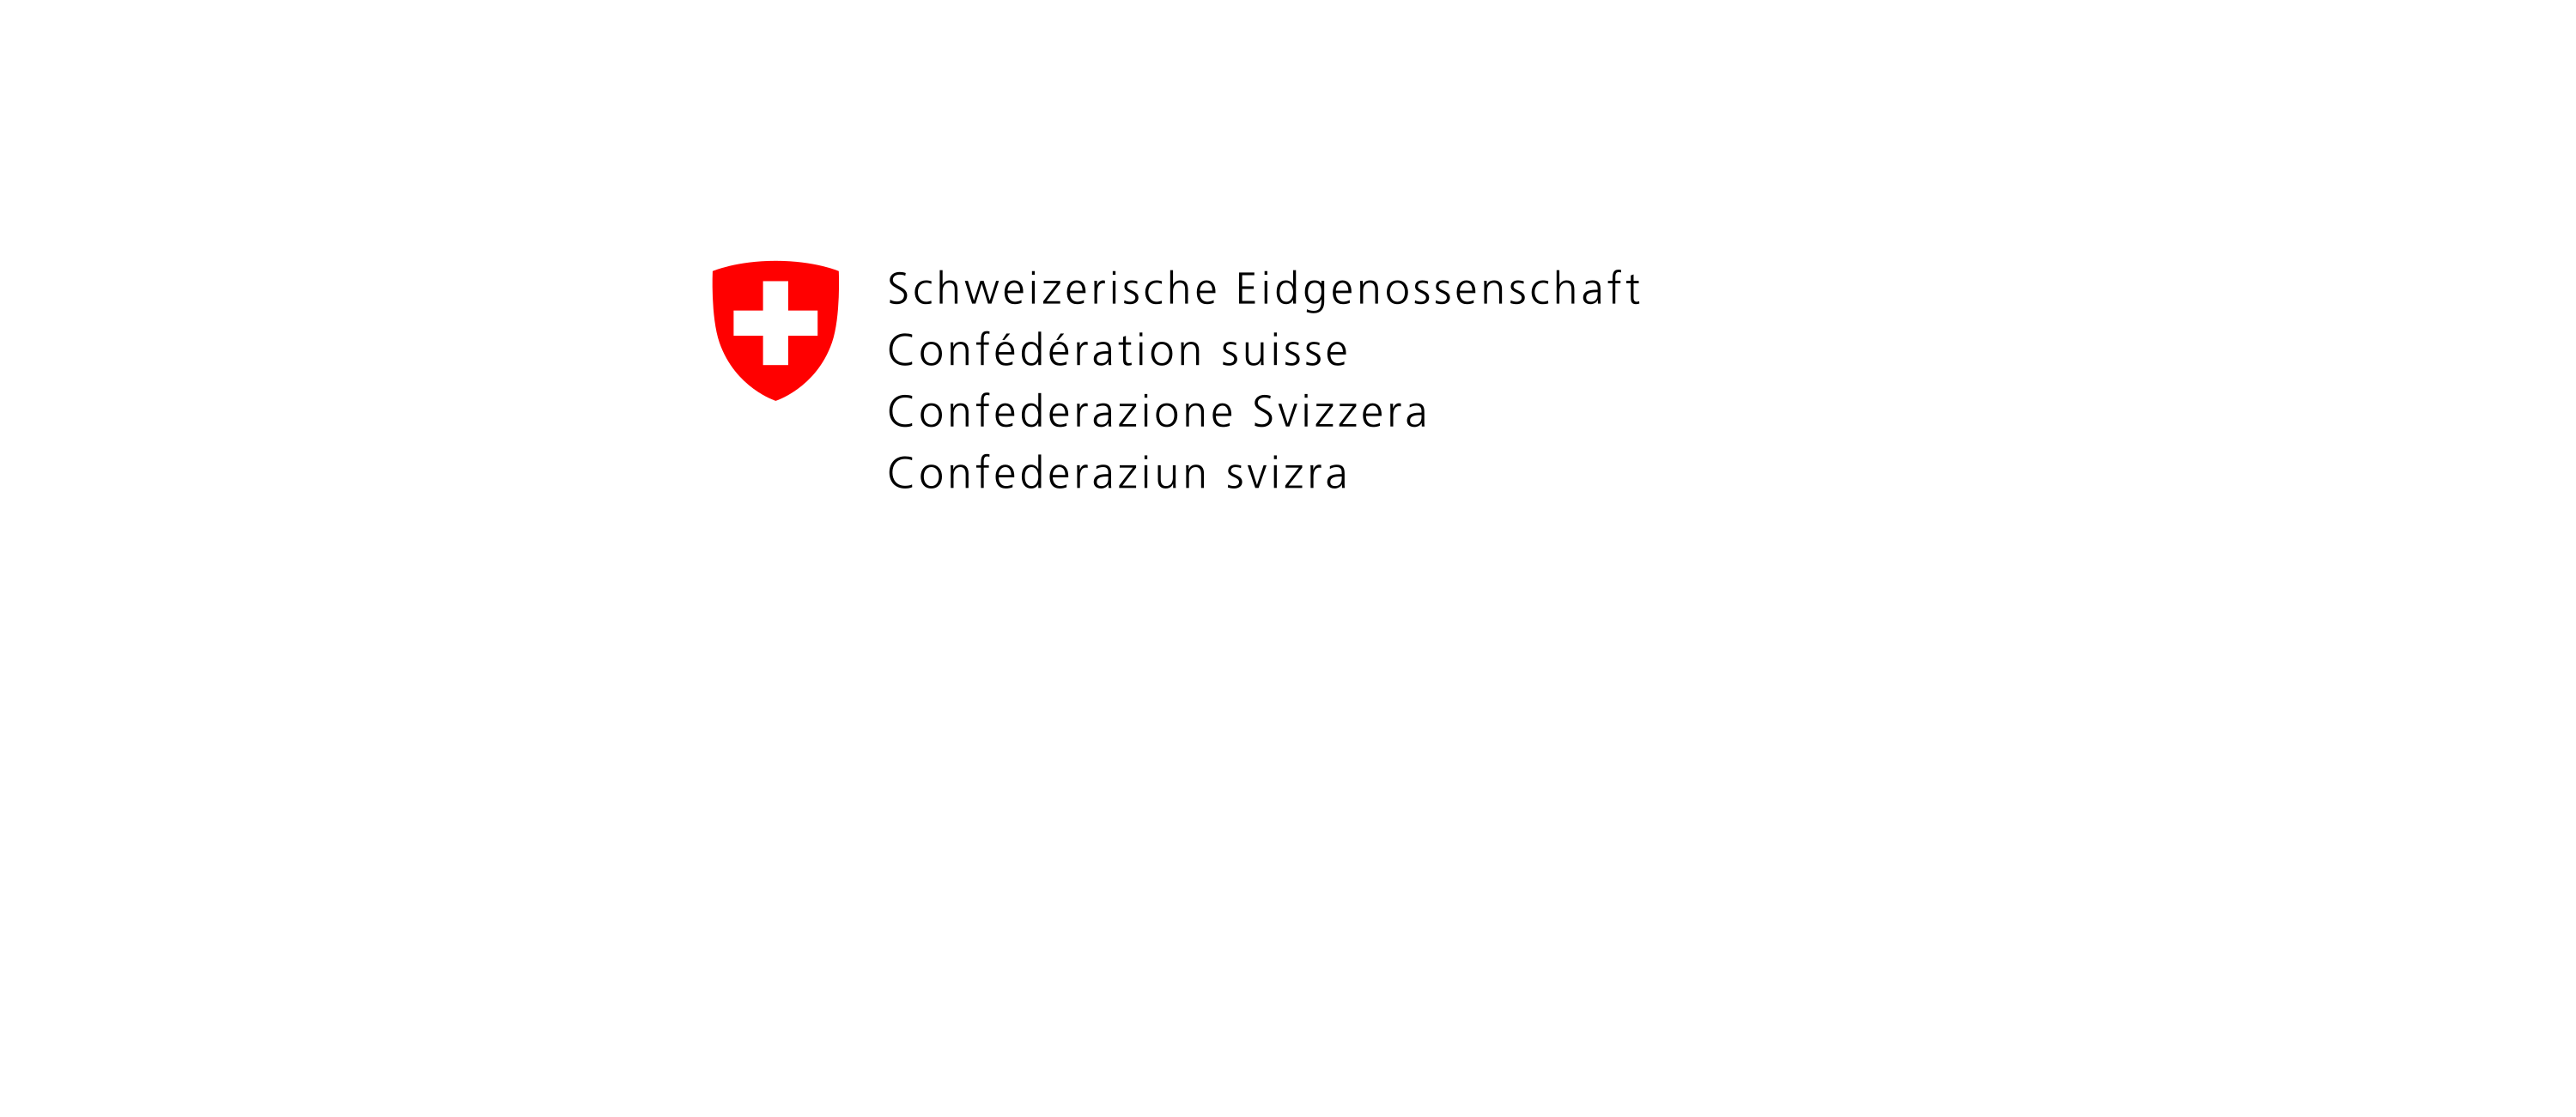 Swiss competition commission investigating pharmaceutical firm over patent use